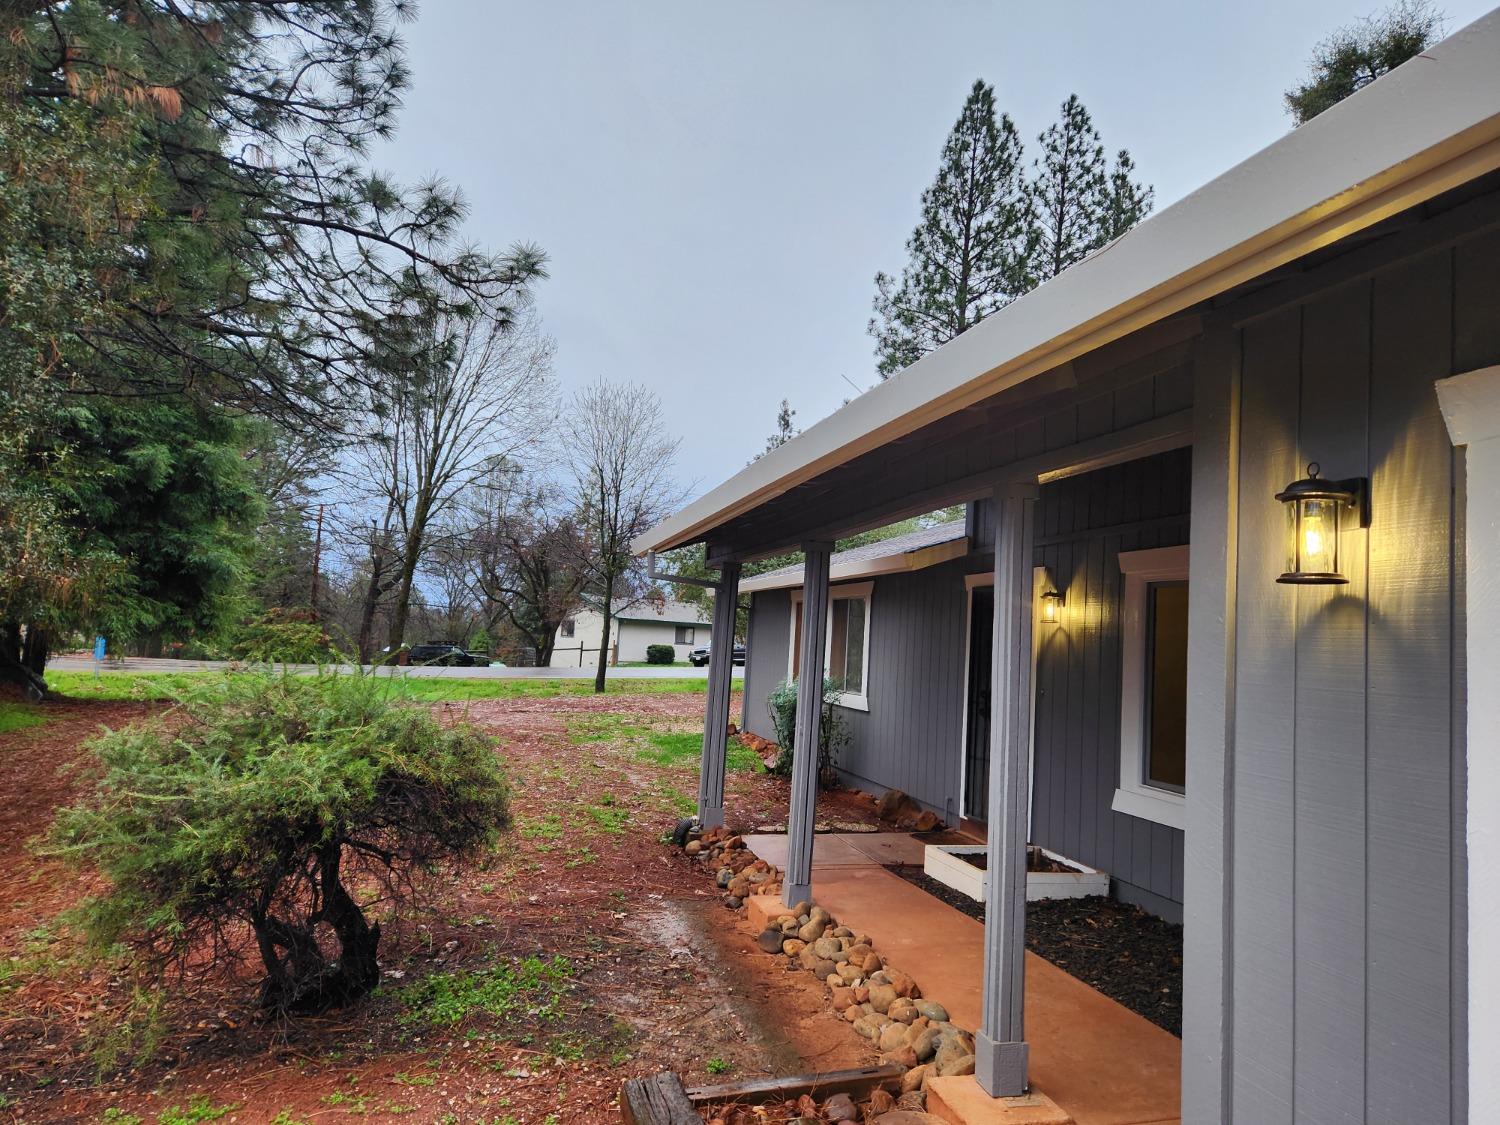 Photo of 17004 George Wy in Grass Valley, CA